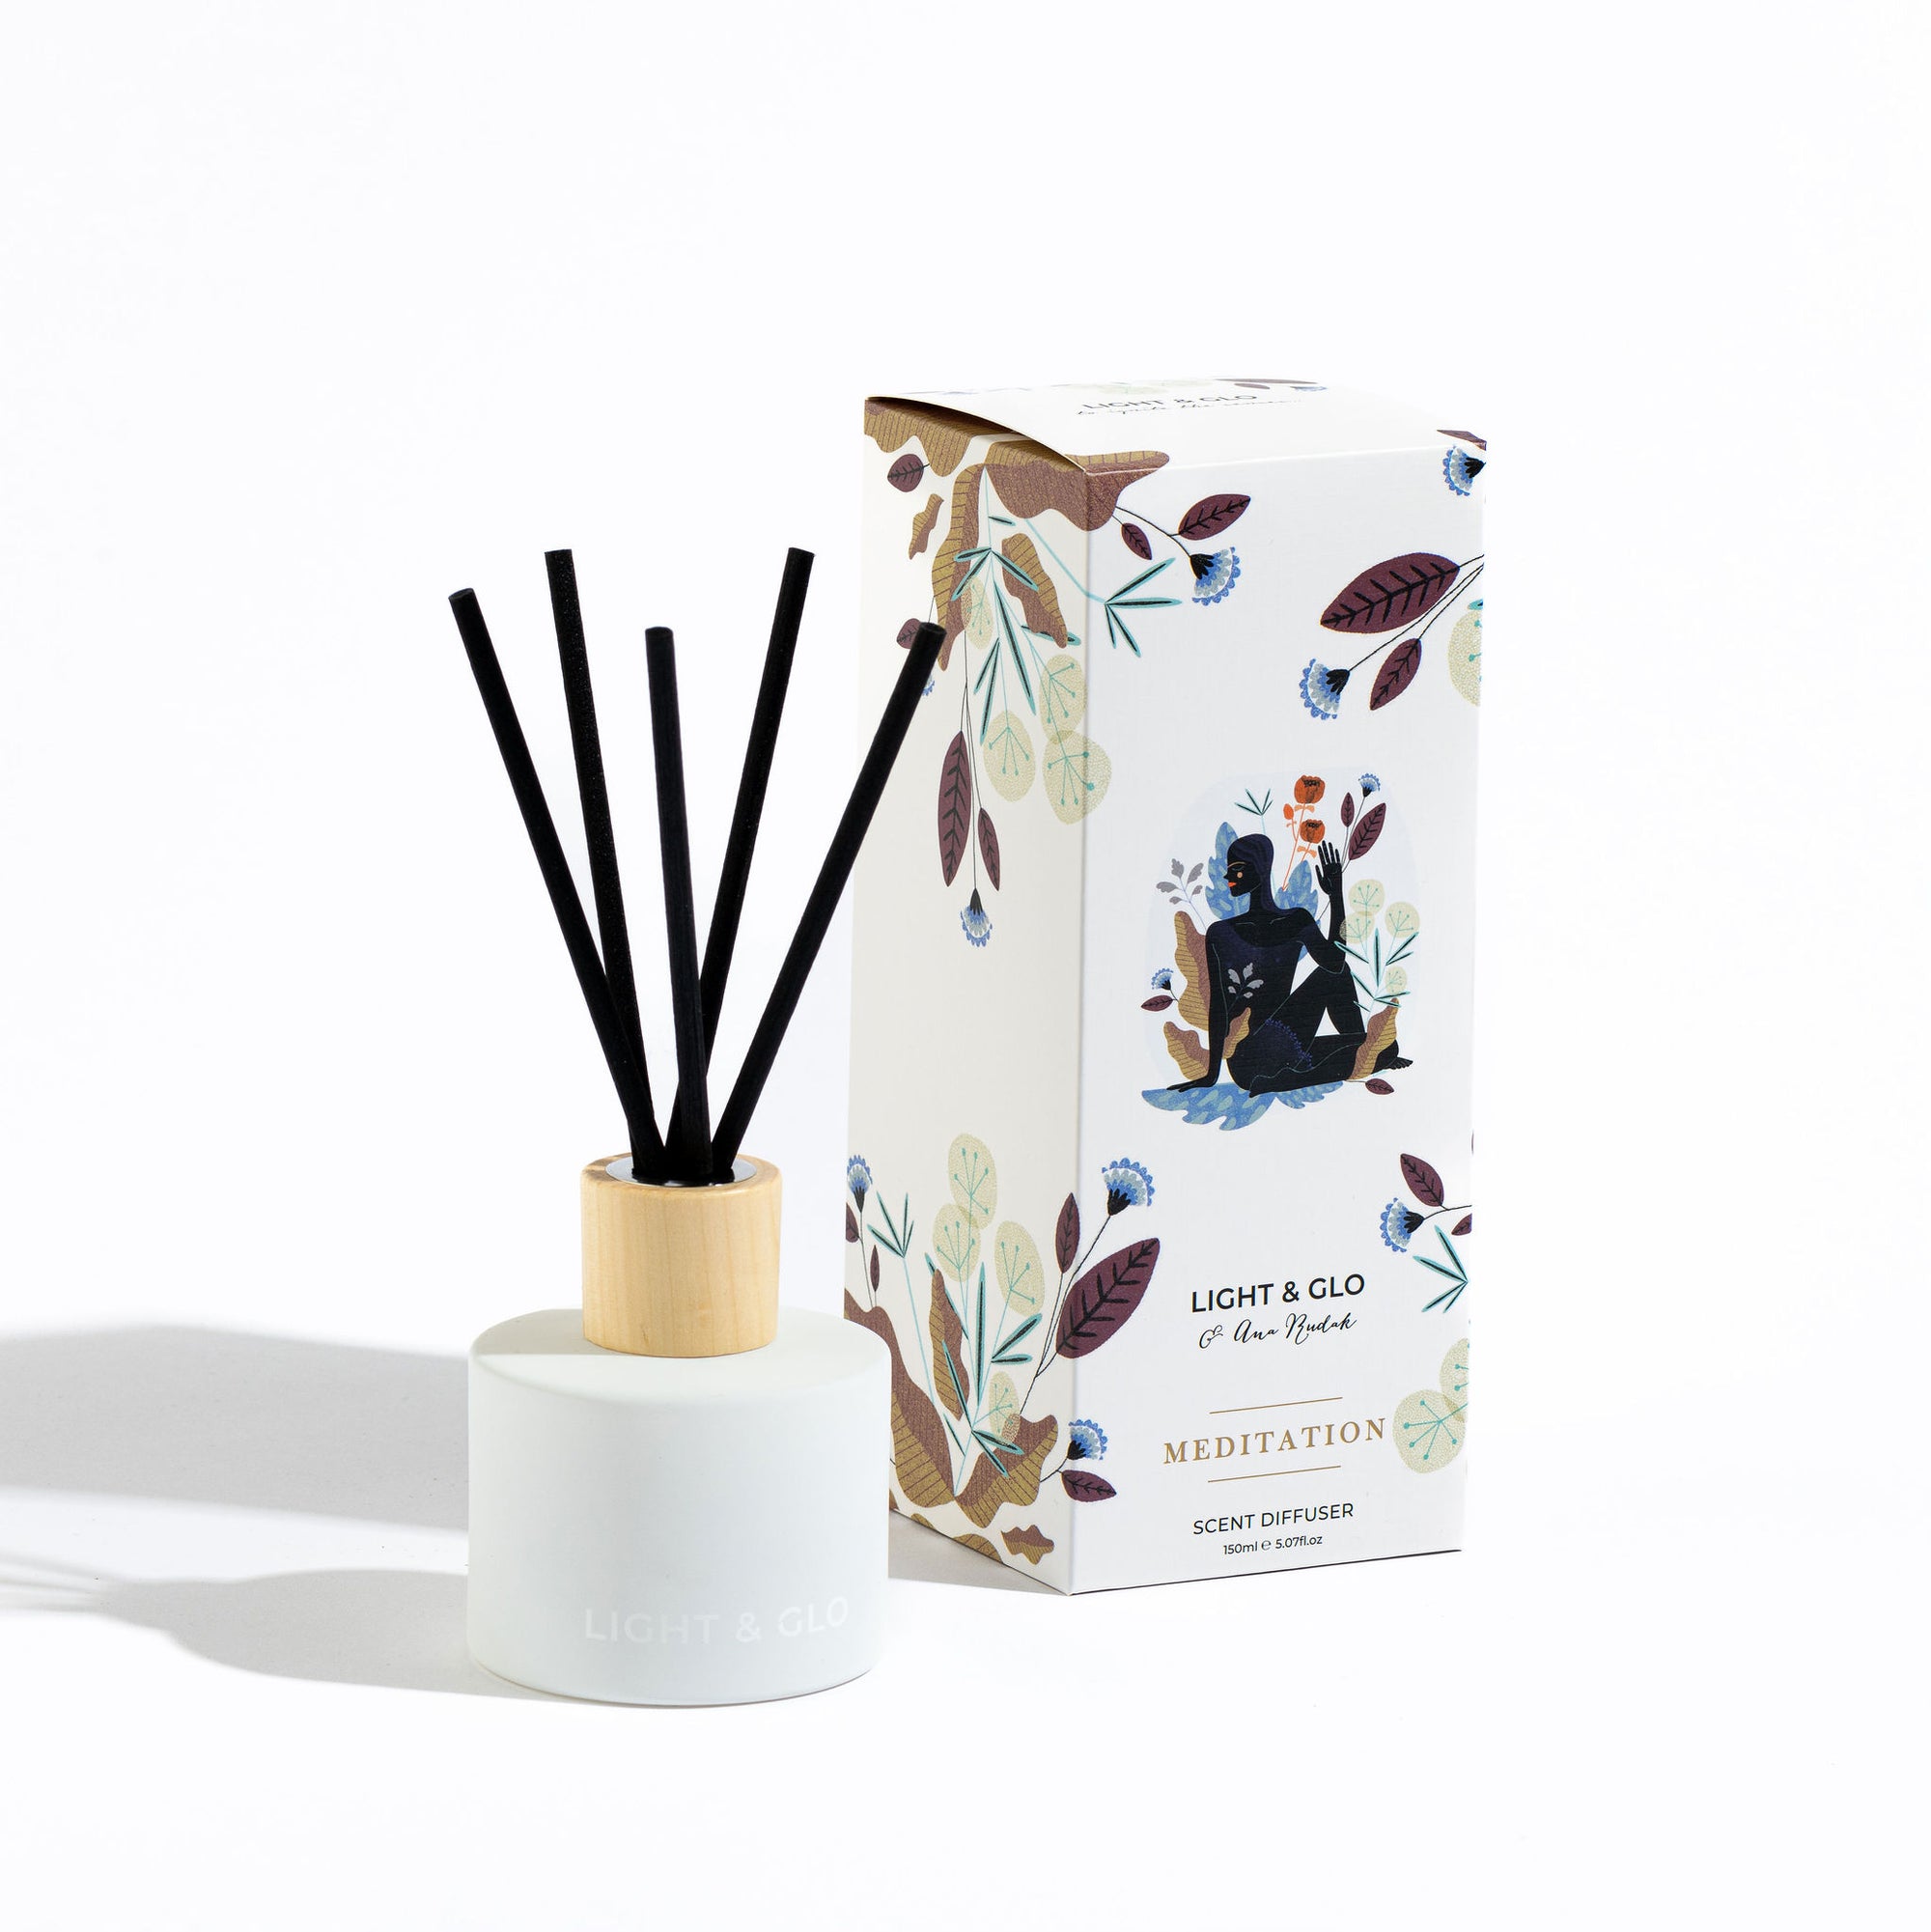 Meditation - Asana Scent Diffuser | Luxury Candles & Home Fragrances by Light + Glo